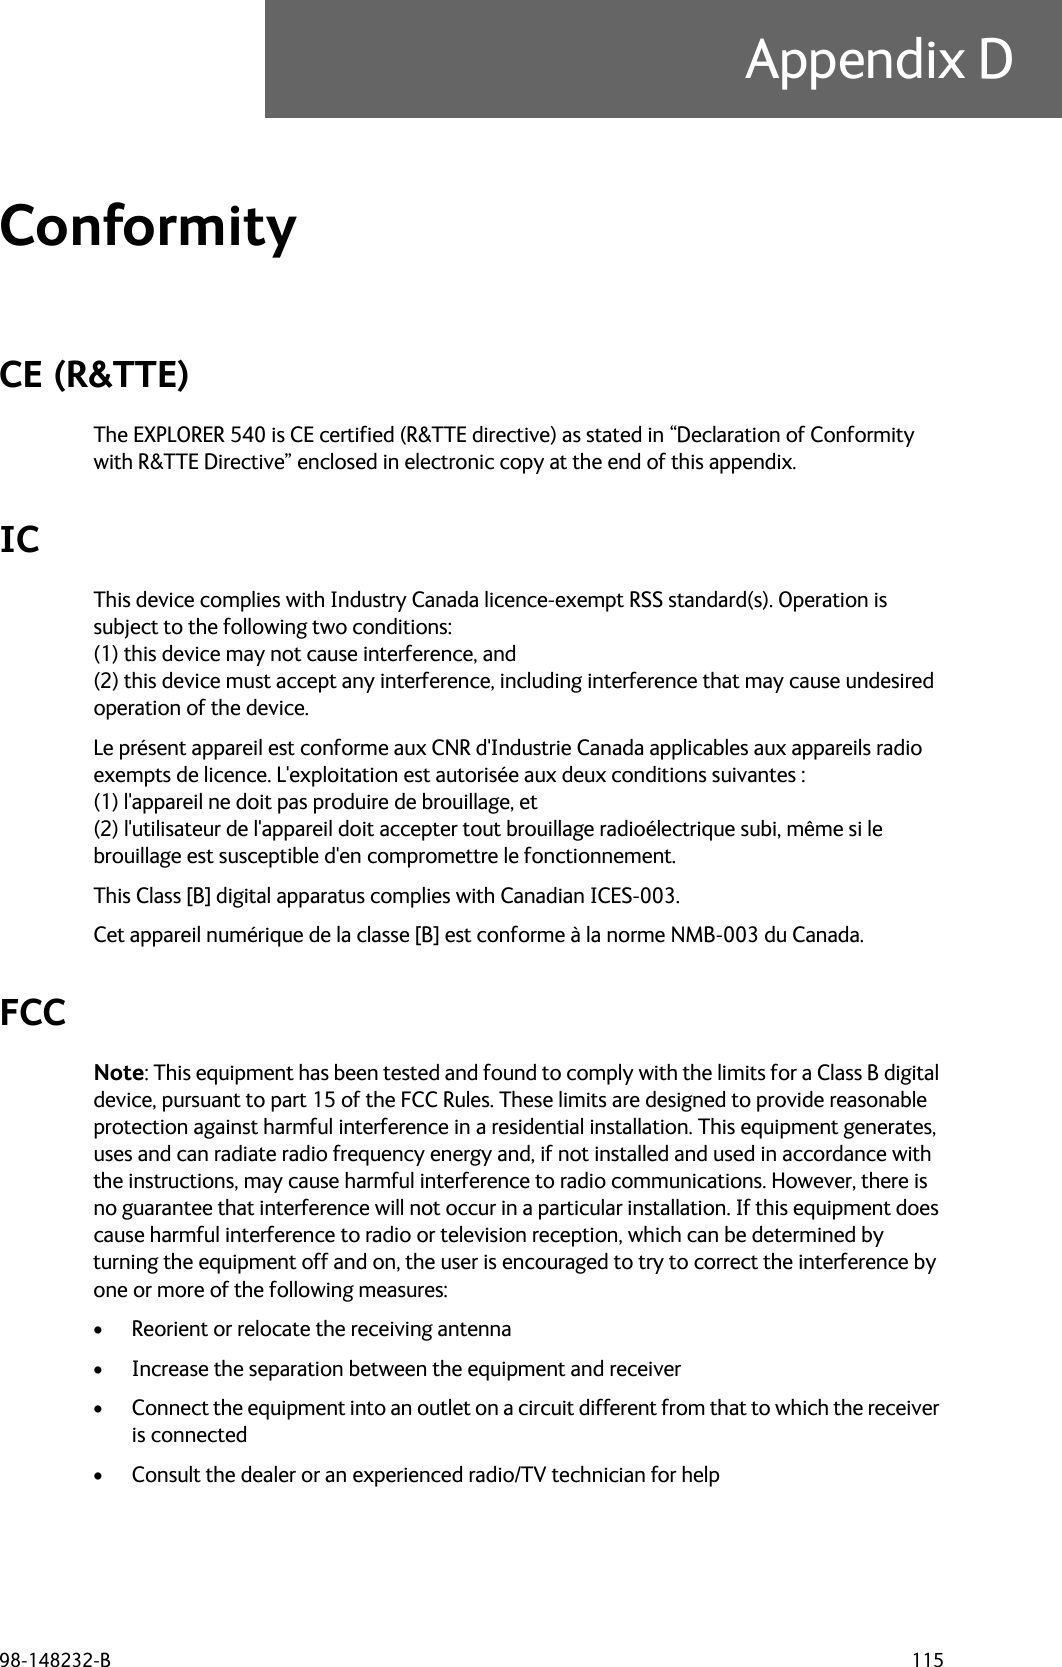 98-148232-B 115Appendix DConformity DCE (R&amp;TTE)The EXPLORER 540 is CE certified (R&amp;TTE directive) as stated in “Declaration of Conformity with R&amp;TTE Directive” enclosed in electronic copy at the end of this appendix.ICThis device complies with Industry Canada licence-exempt RSS standard(s). Operation is subject to the following two conditions: (1) this device may not cause interference, and (2) this device must accept any interference, including interference that may cause undesired operation of the device.Le présent appareil est conforme aux CNR d&apos;Industrie Canada applicables aux appareils radio exempts de licence. L&apos;exploitation est autorisée aux deux conditions suivantes : (1) l&apos;appareil ne doit pas produire de brouillage, et (2) l&apos;utilisateur de l&apos;appareil doit accepter tout brouillage radioélectrique subi, même si le brouillage est susceptible d&apos;en compromettre le fonctionnement.This Class [B] digital apparatus complies with Canadian ICES-003.Cet appareil numérique de la classe [B] est conforme à la norme NMB-003 du Canada.FCCNote: This equipment has been tested and found to comply with the limits for a Class B digital device, pursuant to part 15 of the FCC Rules. These limits are designed to provide reasonable protection against harmful interference in a residential installation. This equipment generates, uses and can radiate radio frequency energy and, if not installed and used in accordance with the instructions, may cause harmful interference to radio communications. However, there is no guarantee that interference will not occur in a particular installation. If this equipment does cause harmful interference to radio or television reception, which can be determined by turning the equipment off and on, the user is encouraged to try to correct the interference by one or more of the following measures:• Reorient or relocate the receiving antenna• Increase the separation between the equipment and receiver• Connect the equipment into an outlet on a circuit different from that to which the receiver is connected• Consult the dealer or an experienced radio/TV technician for help